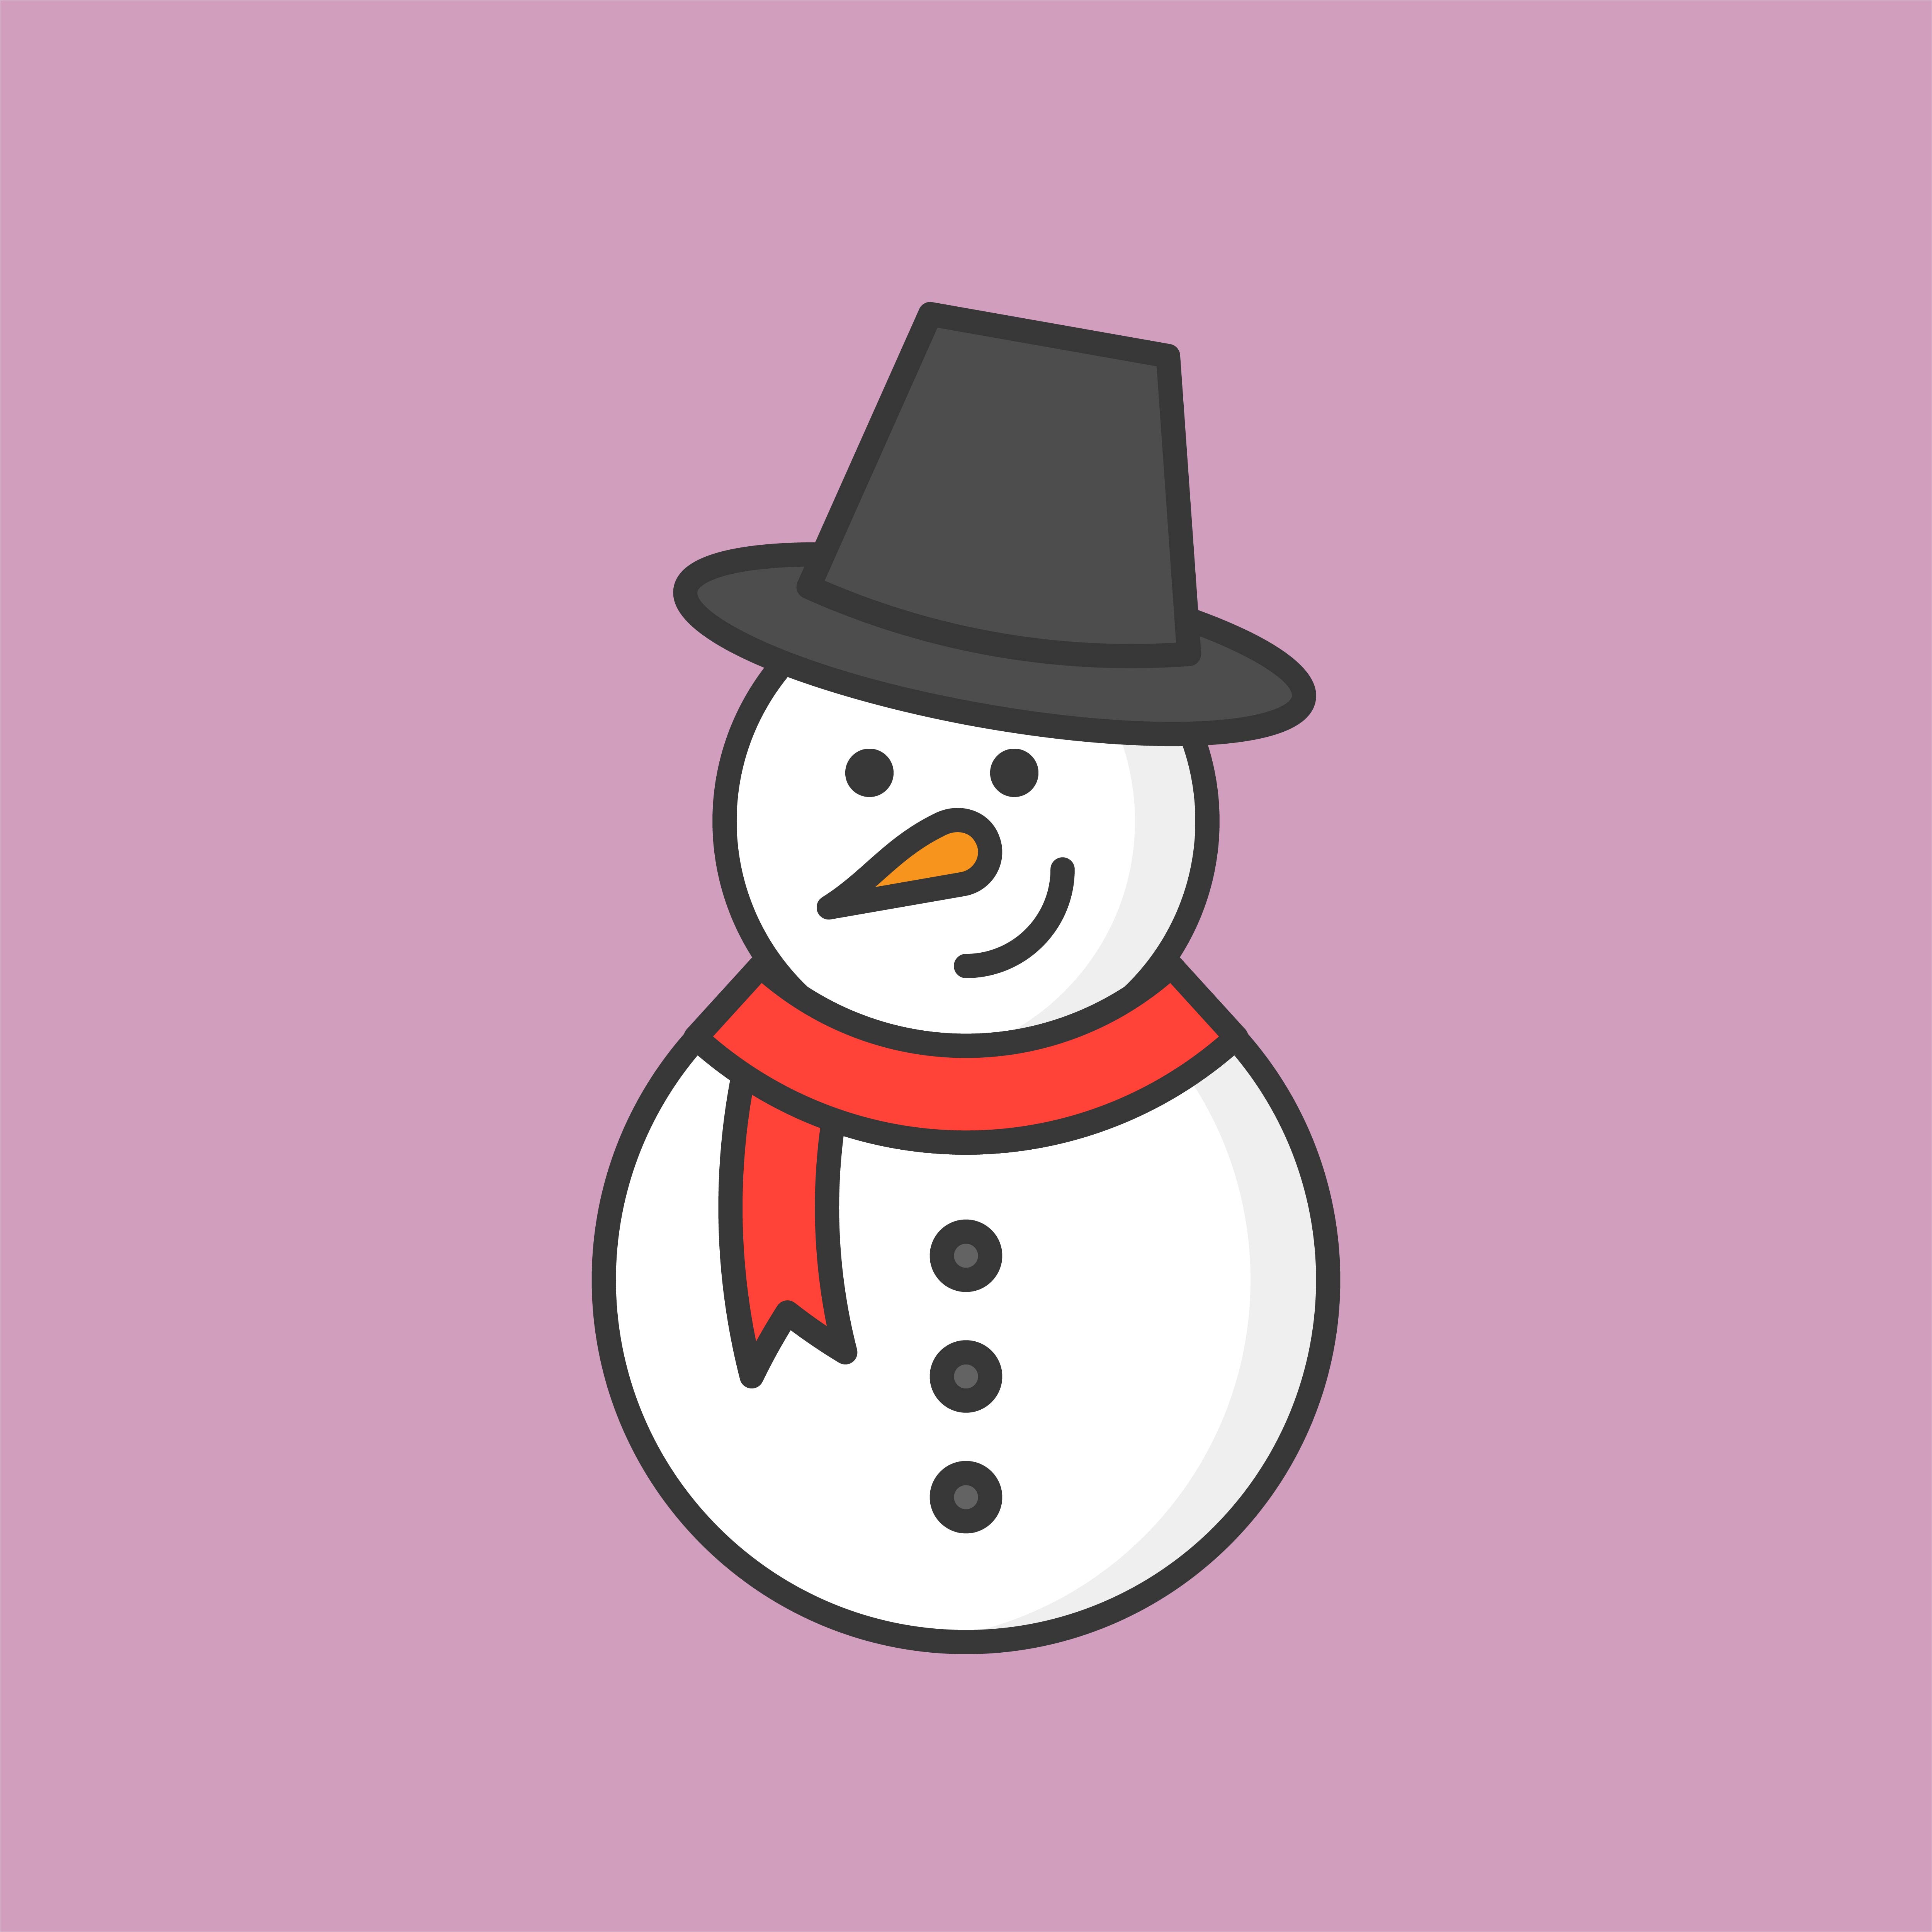 Download snowman, filled outline icon for Christmas theme 463999 - Download Free Vectors, Clipart ...